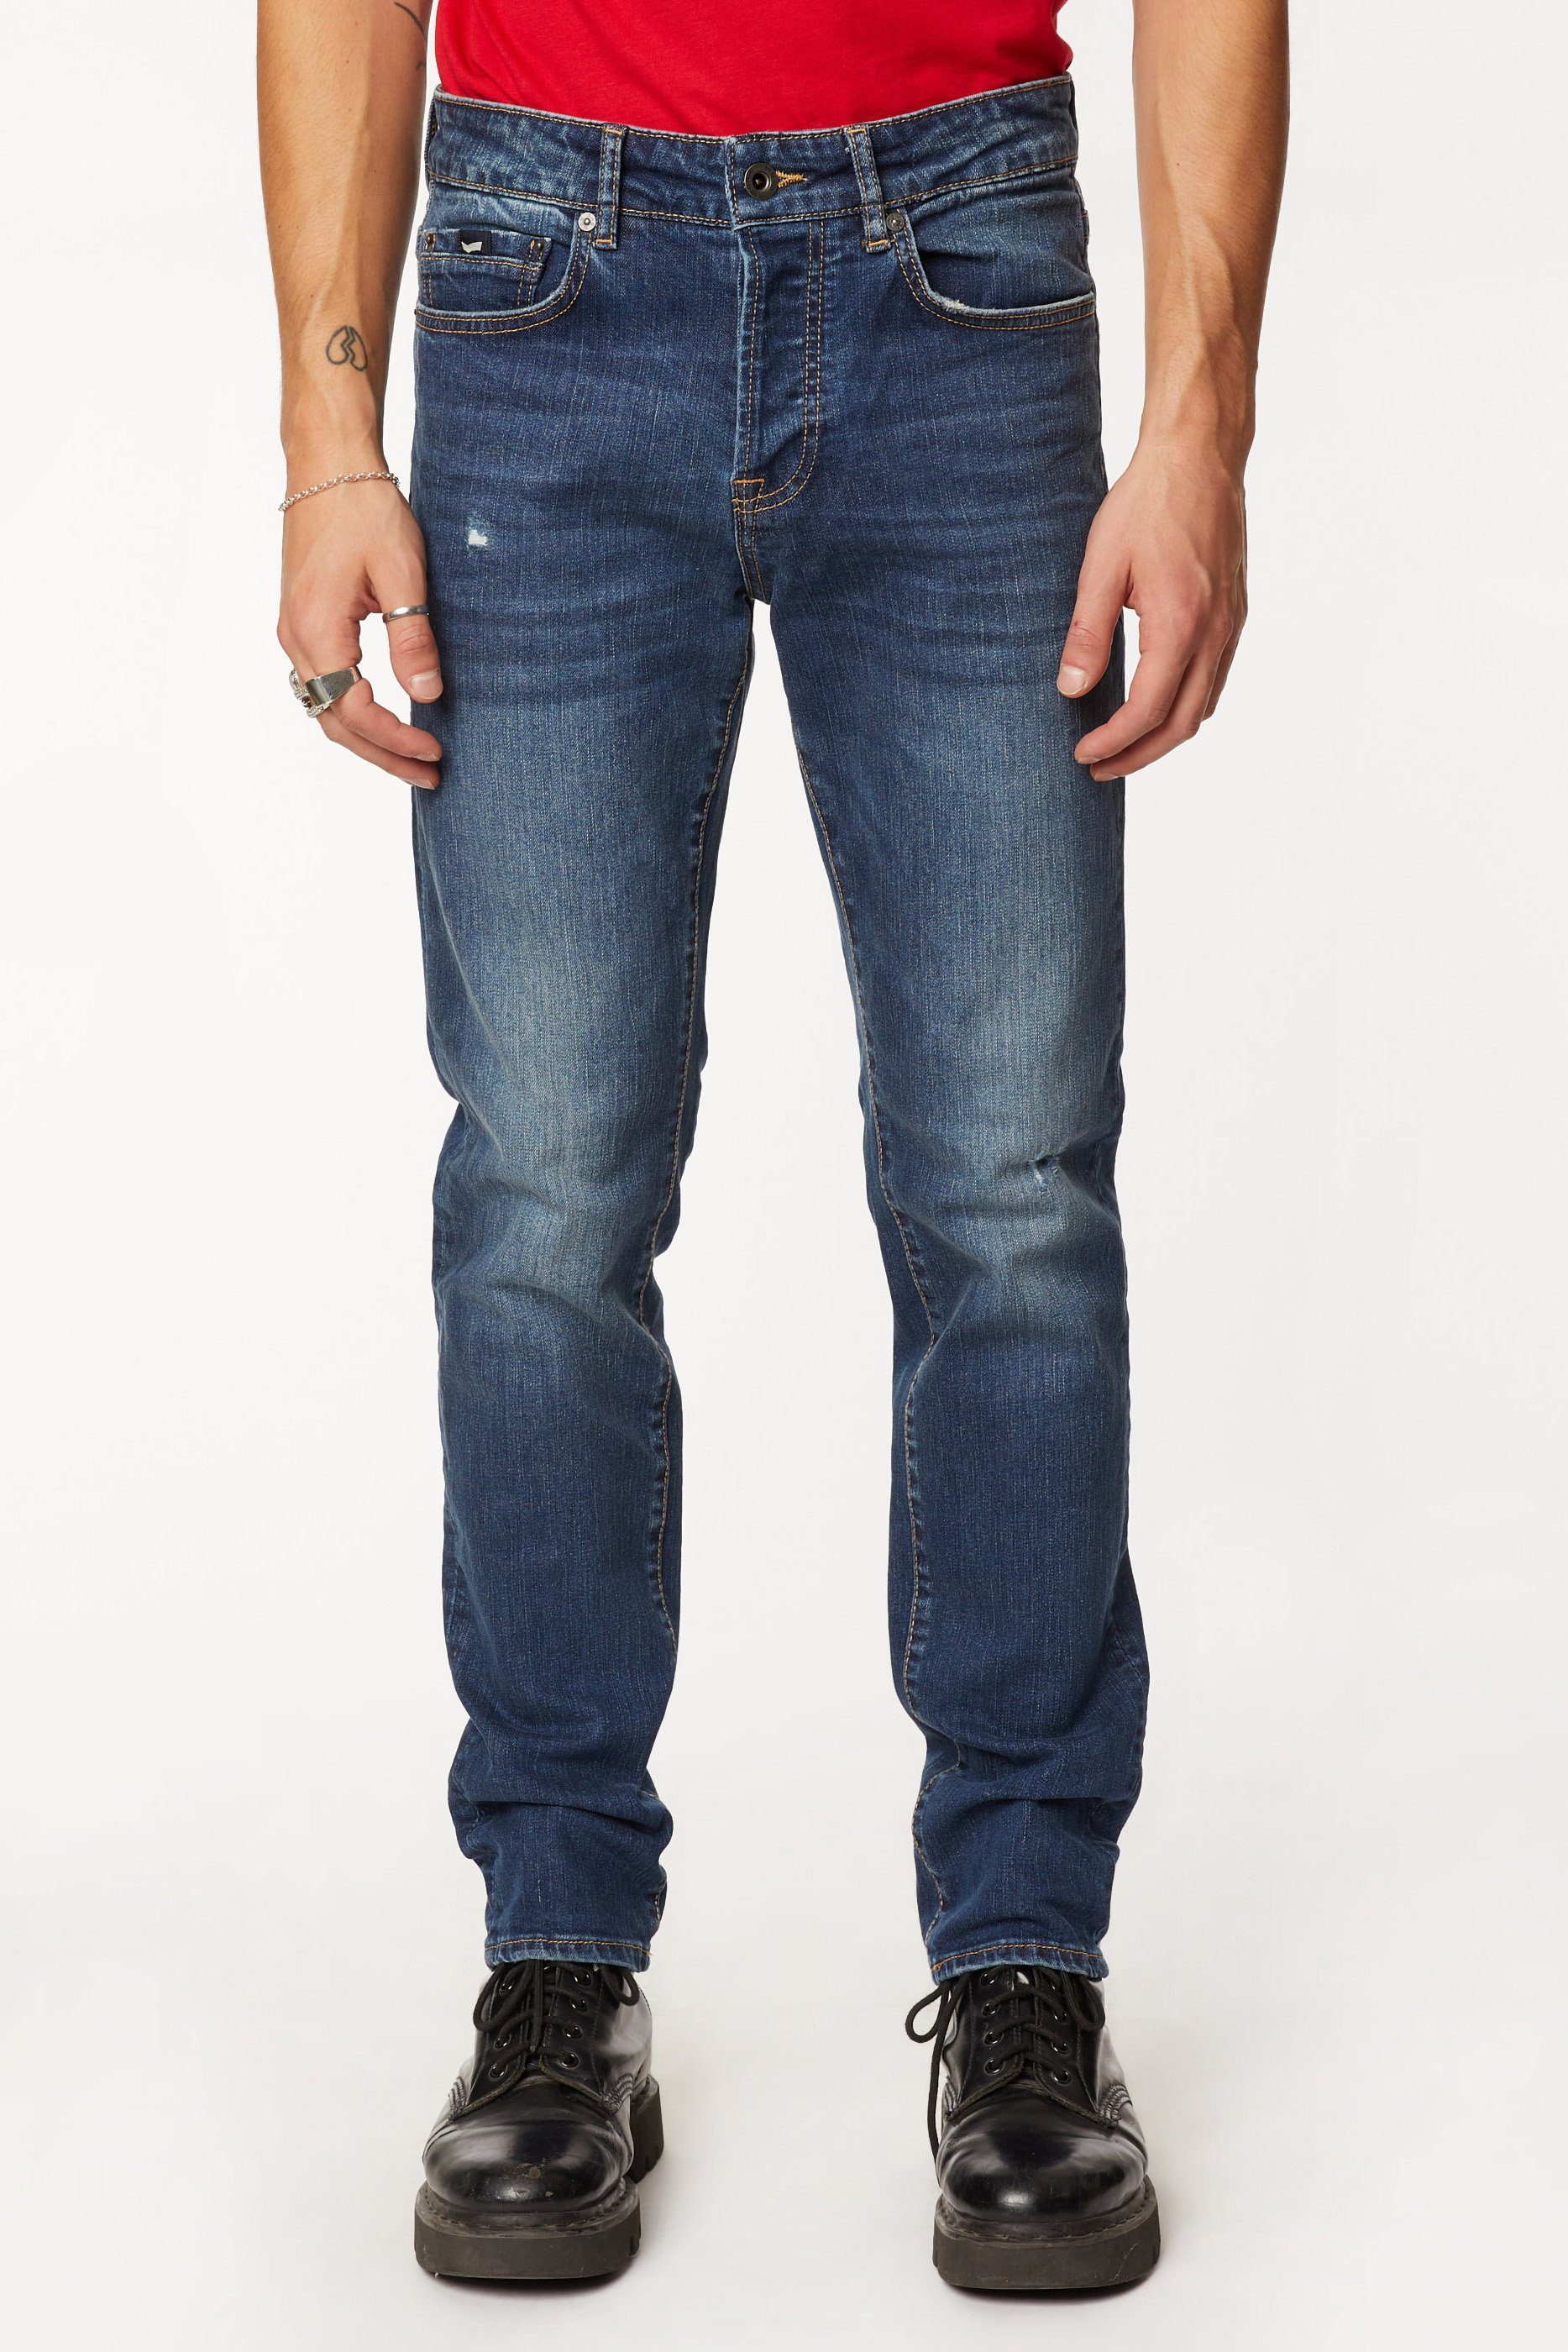 GAS Slim-fit-Jeans ANDERS mit Super-Bleached-Waschung